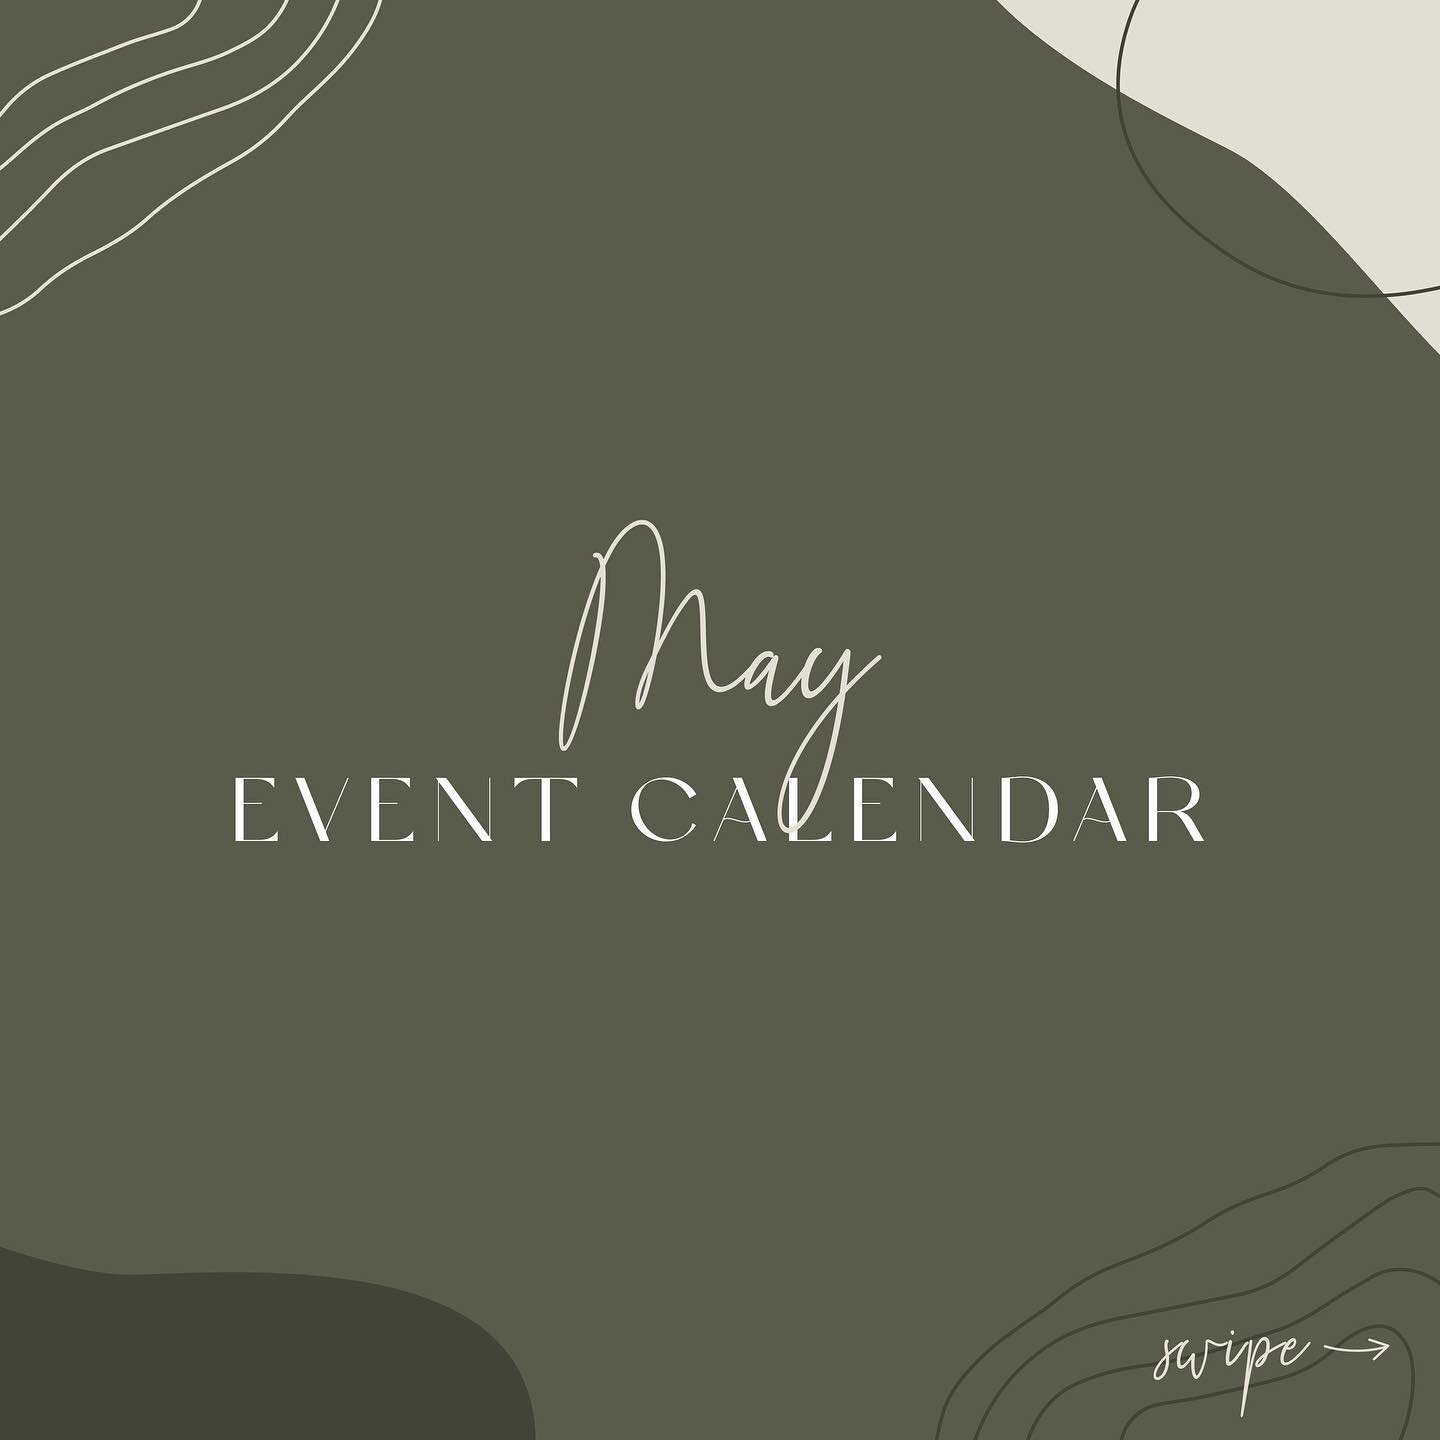 May event calendar is out!🤩

Excited to serve San Diego, Sacramento and Bay Area babyy! 😏
.
.
.
.